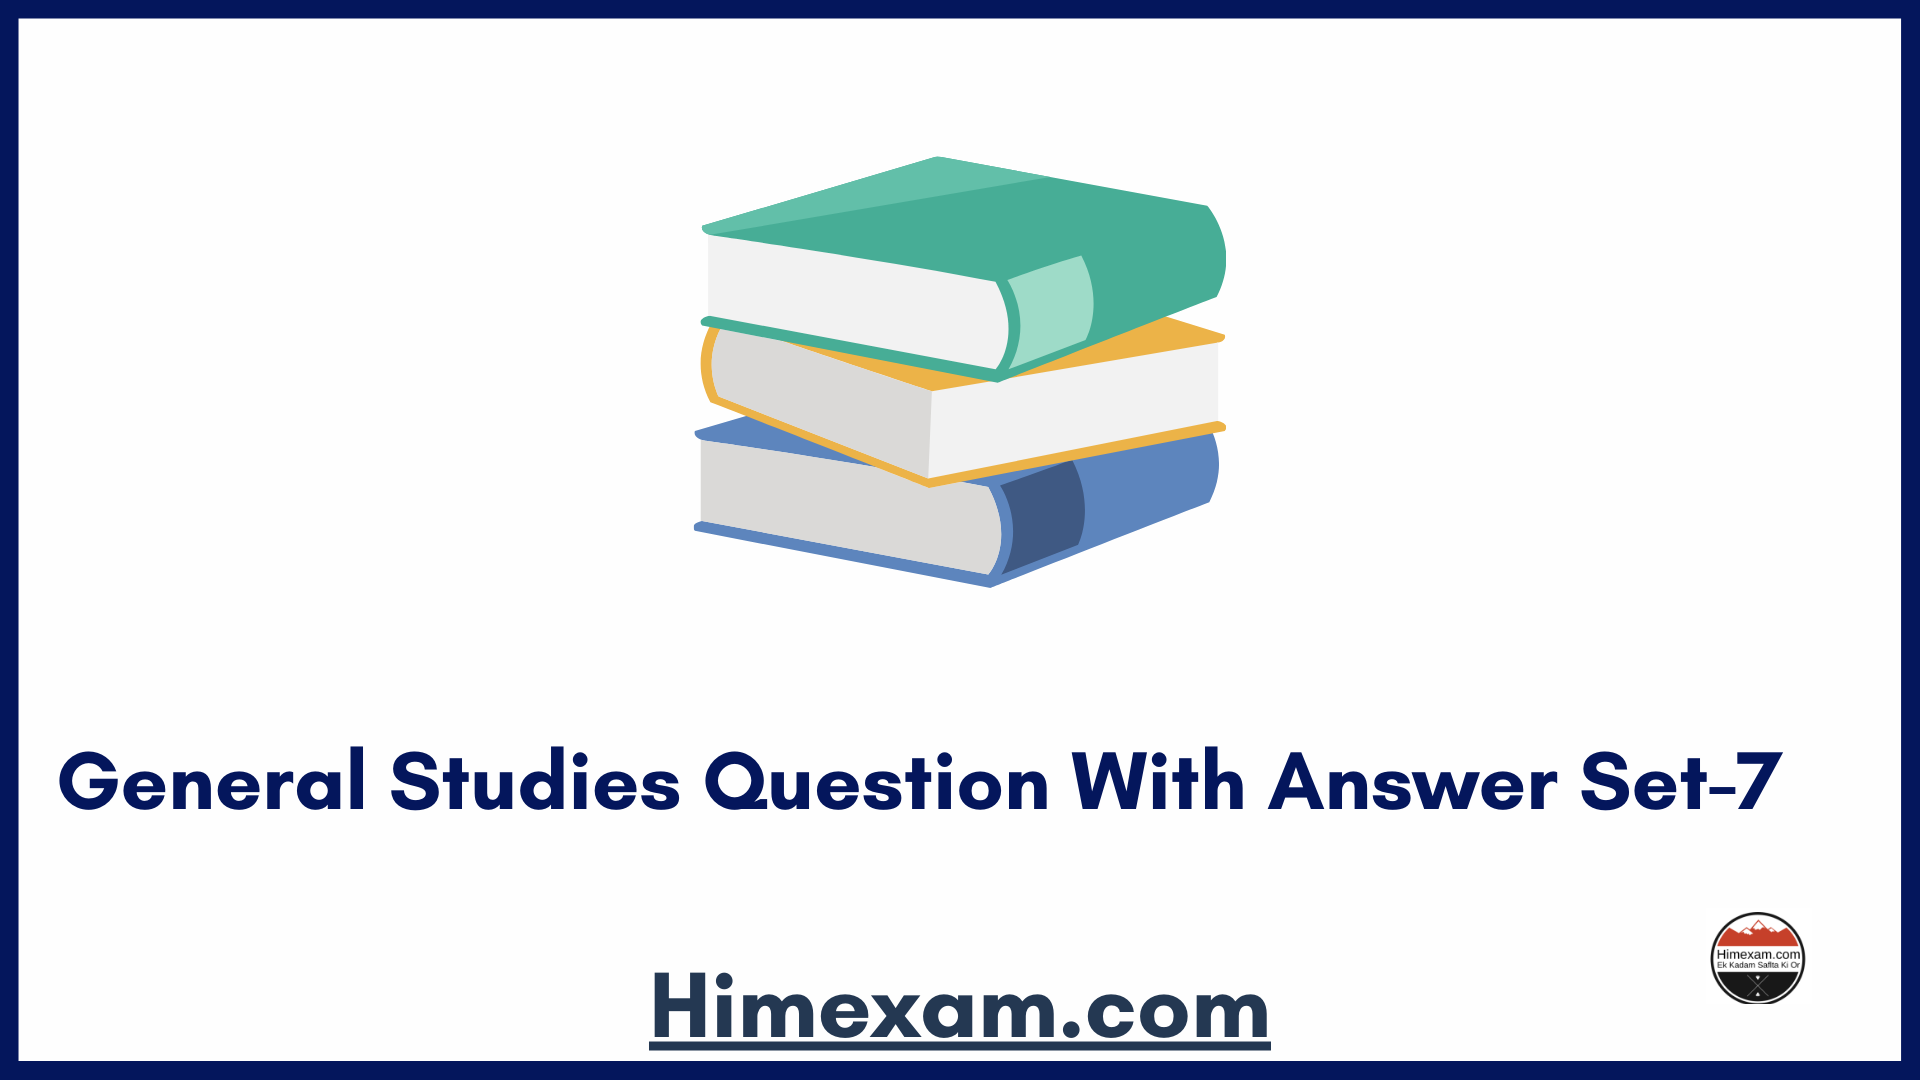 General Studies Question With Answer Set-7